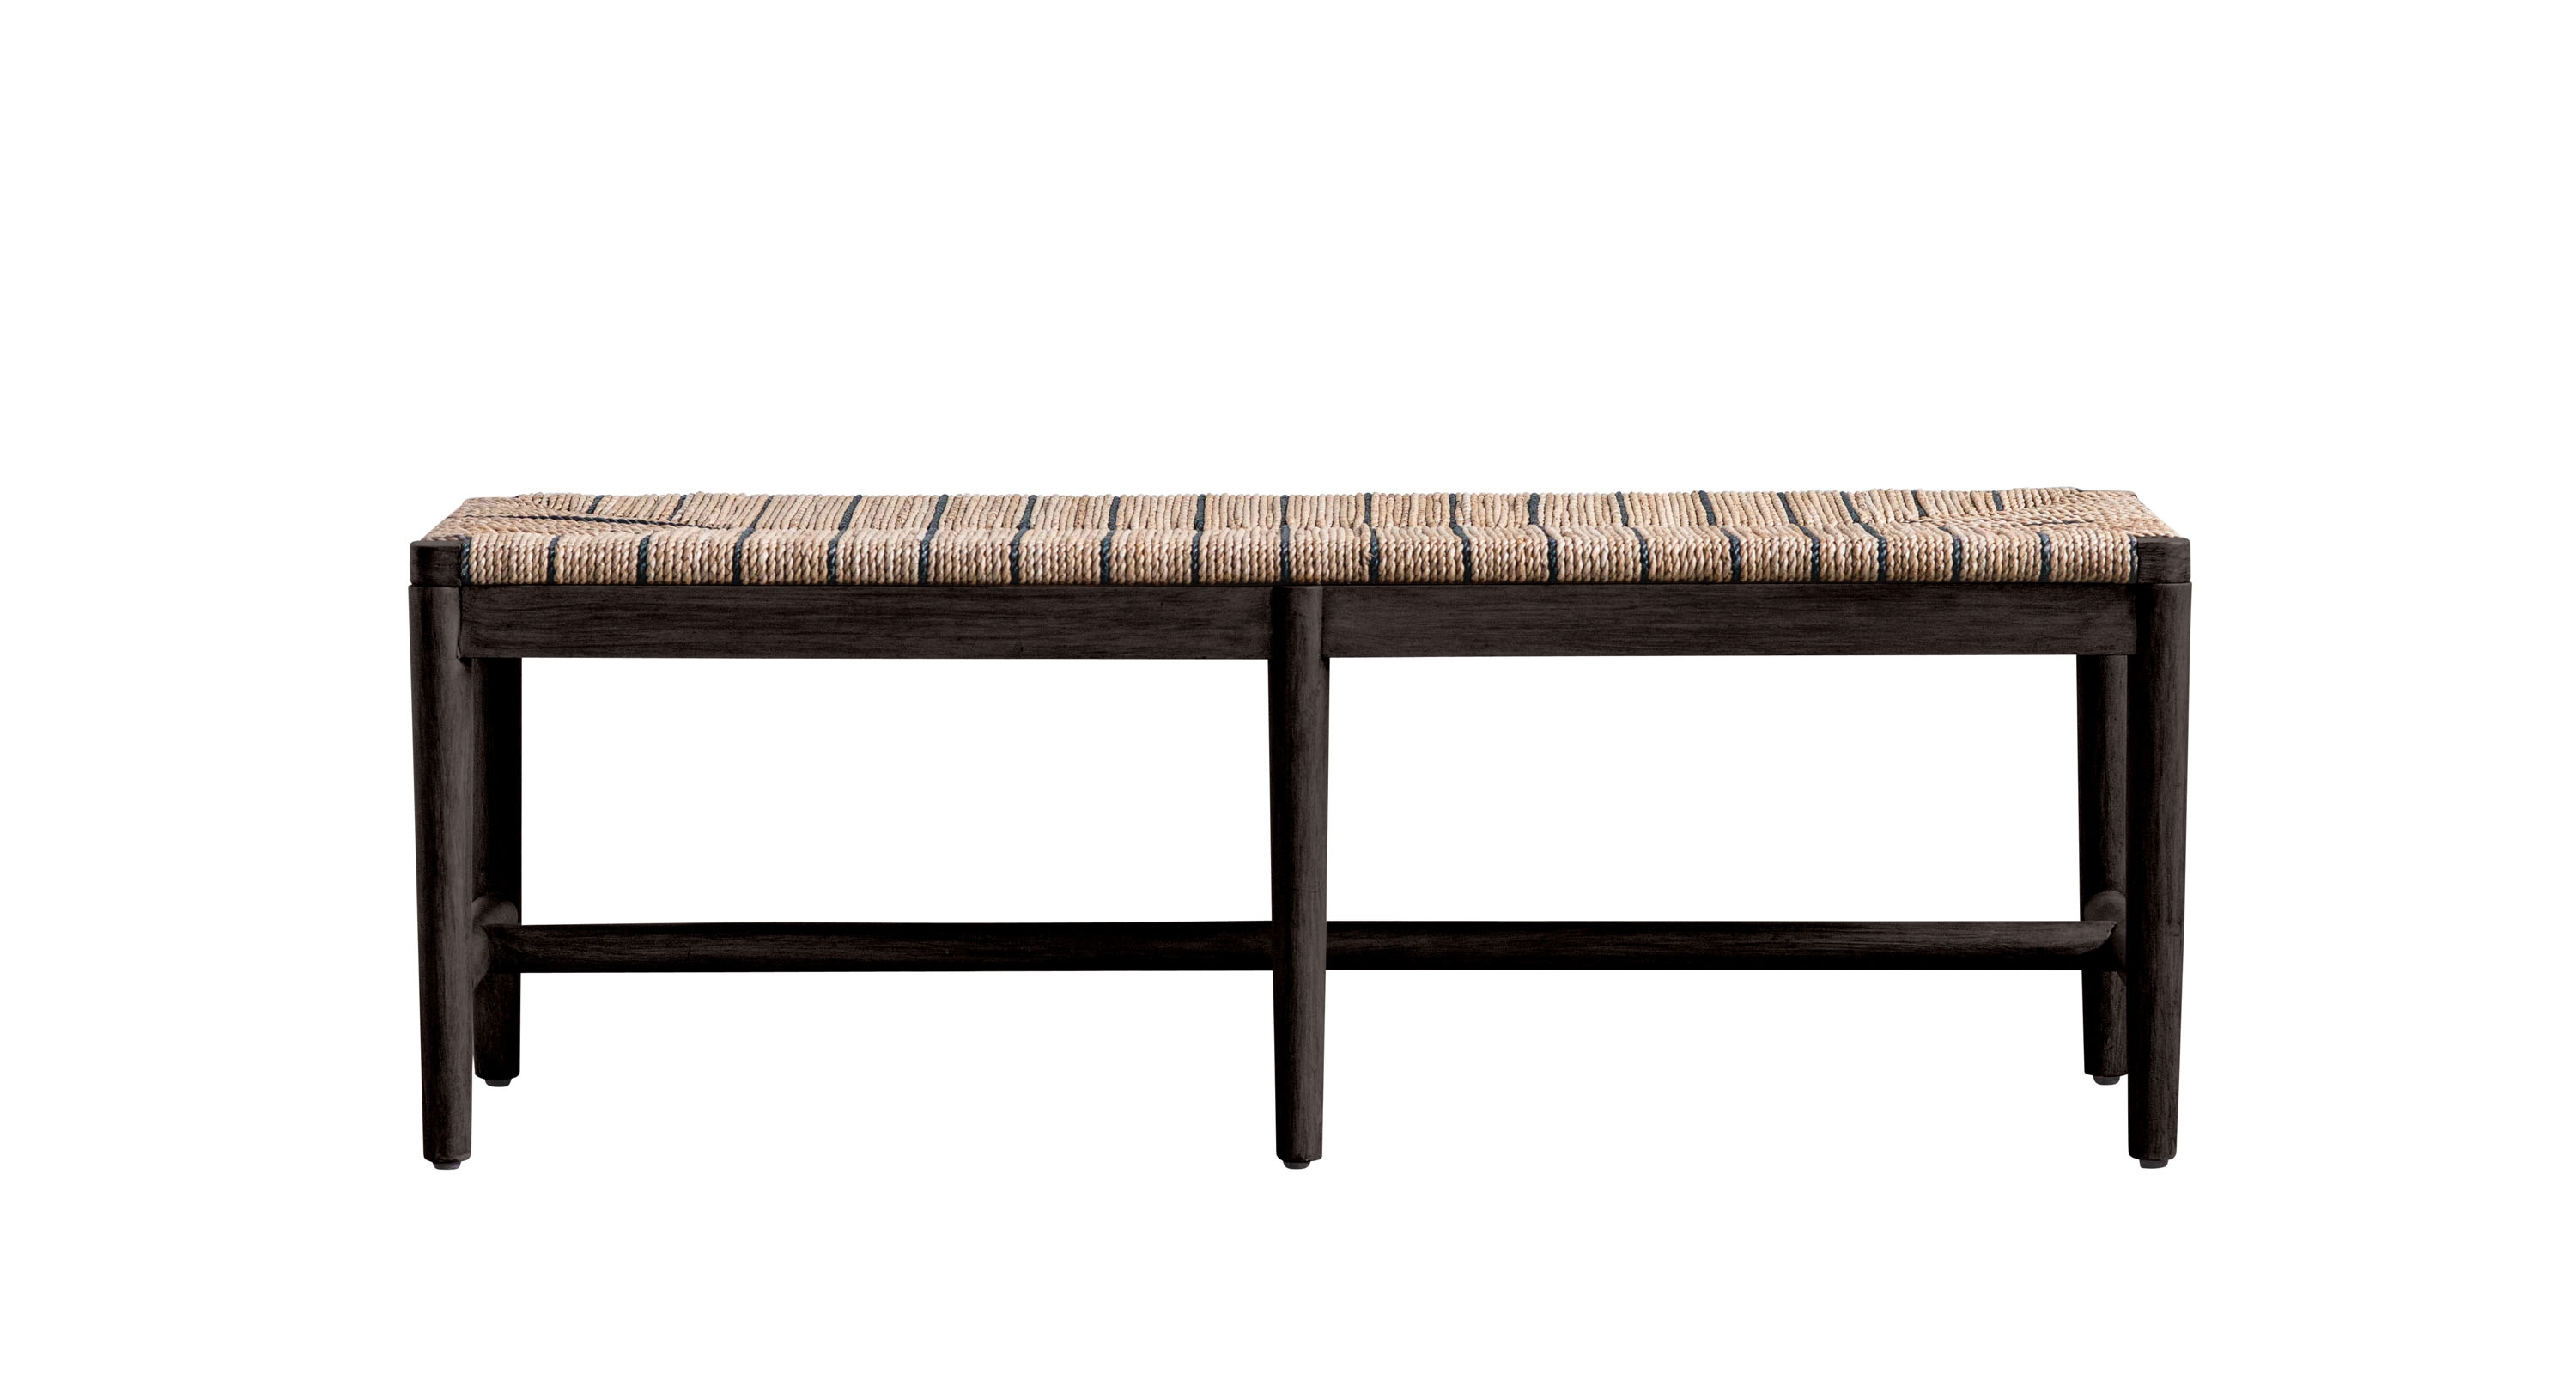 Mango Wood Bench with Brown & Black Woven Rope Seat - Image 0